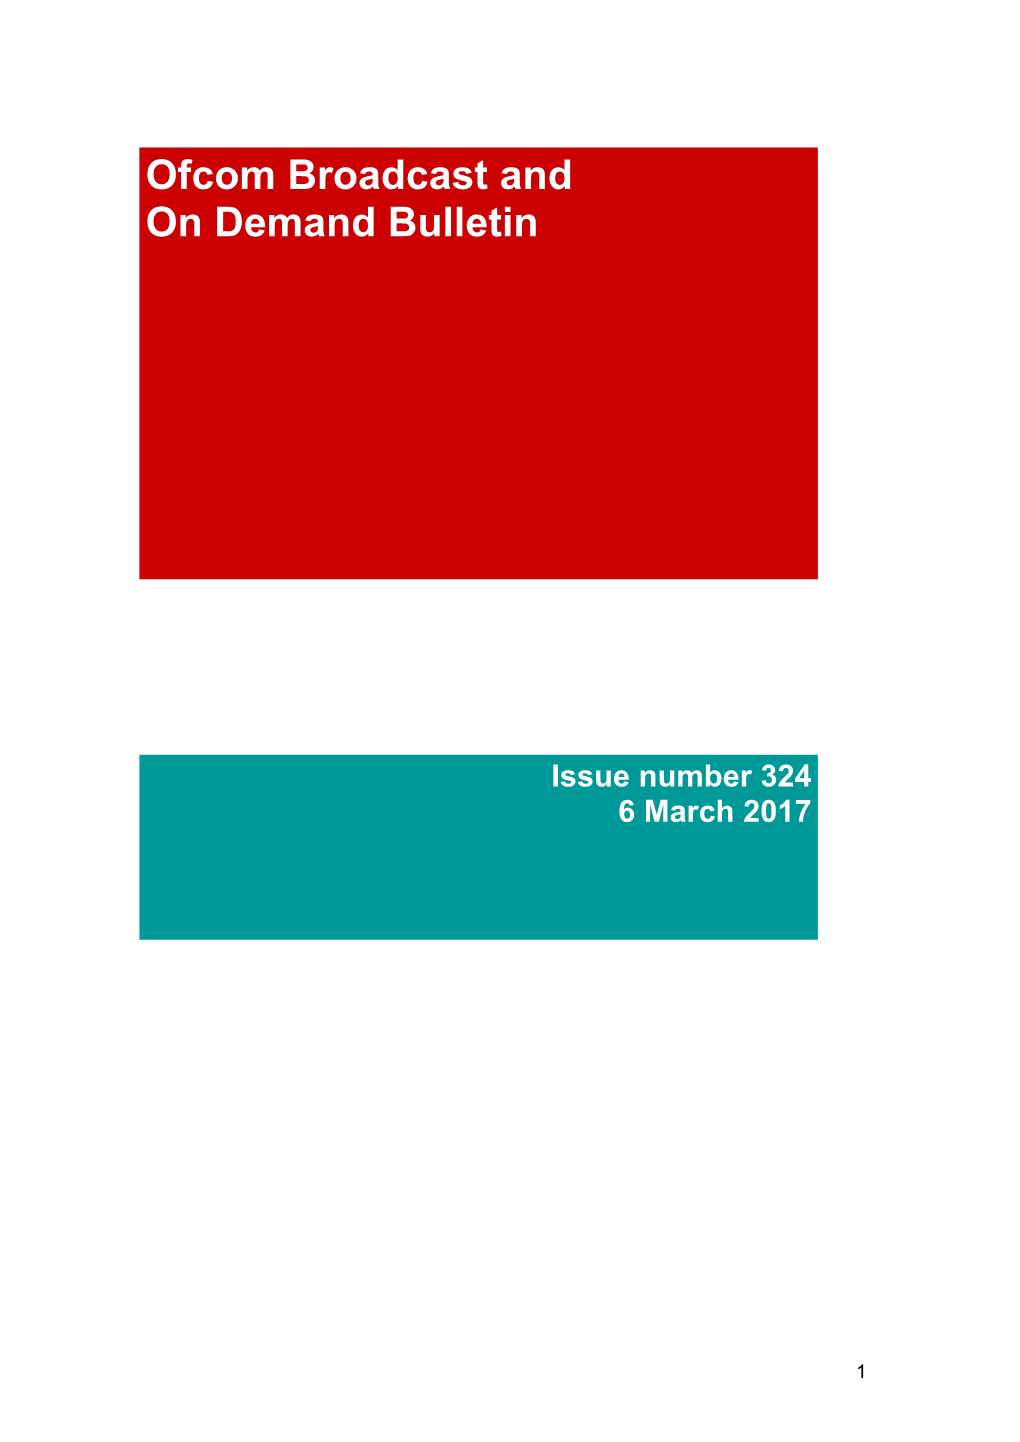 Broadcast and on Demand Bulletin Issue Number 324 06/03/17